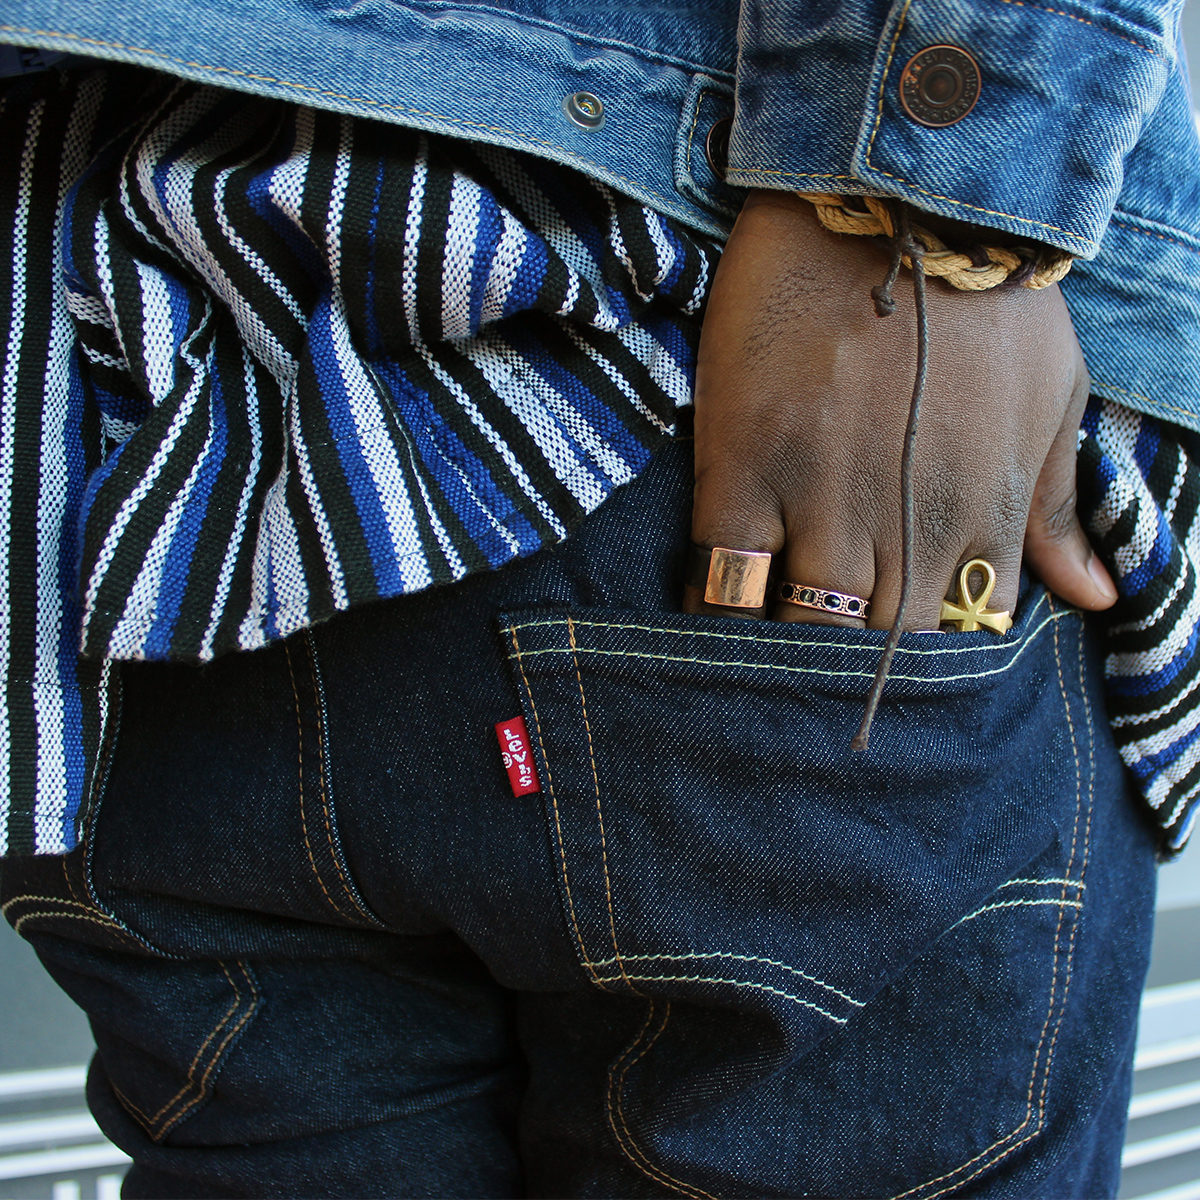 levi jeans style guide